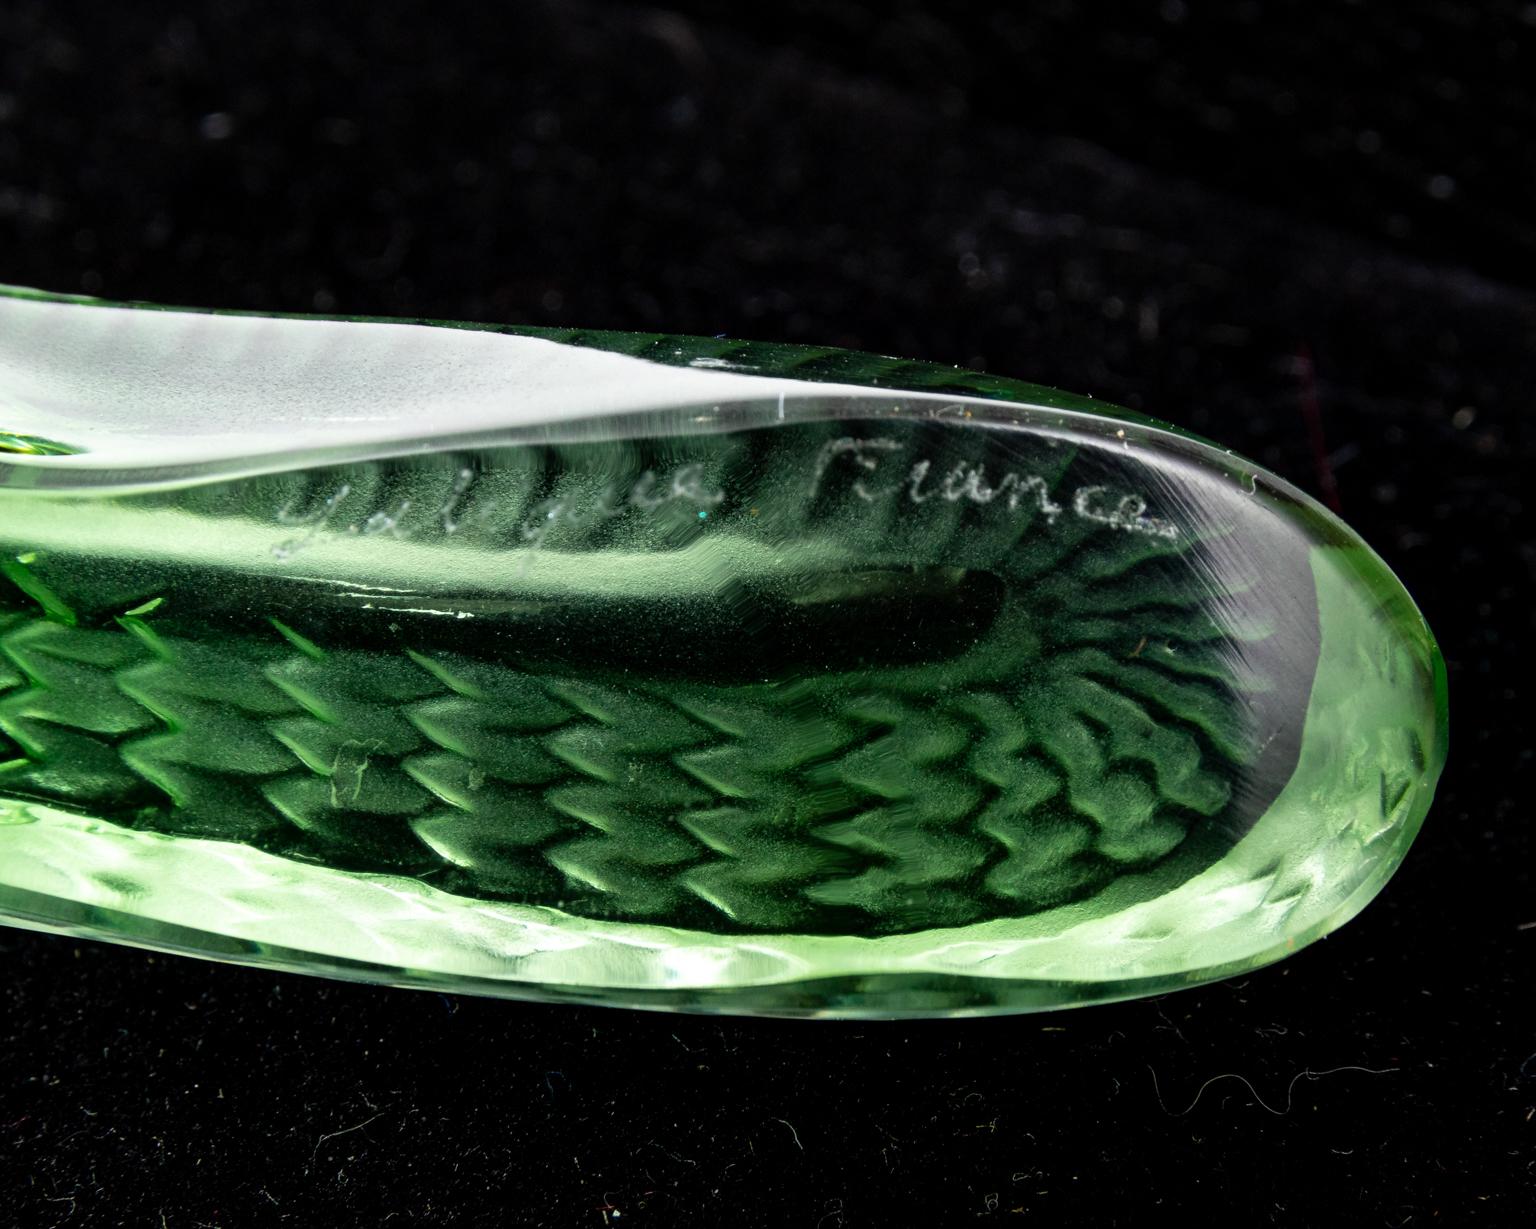 French lizard figurine by Lalique in a mint green colored glass. The piece is signed with Lalique maker's mark. Made in France. Please note of wear consistent with age.